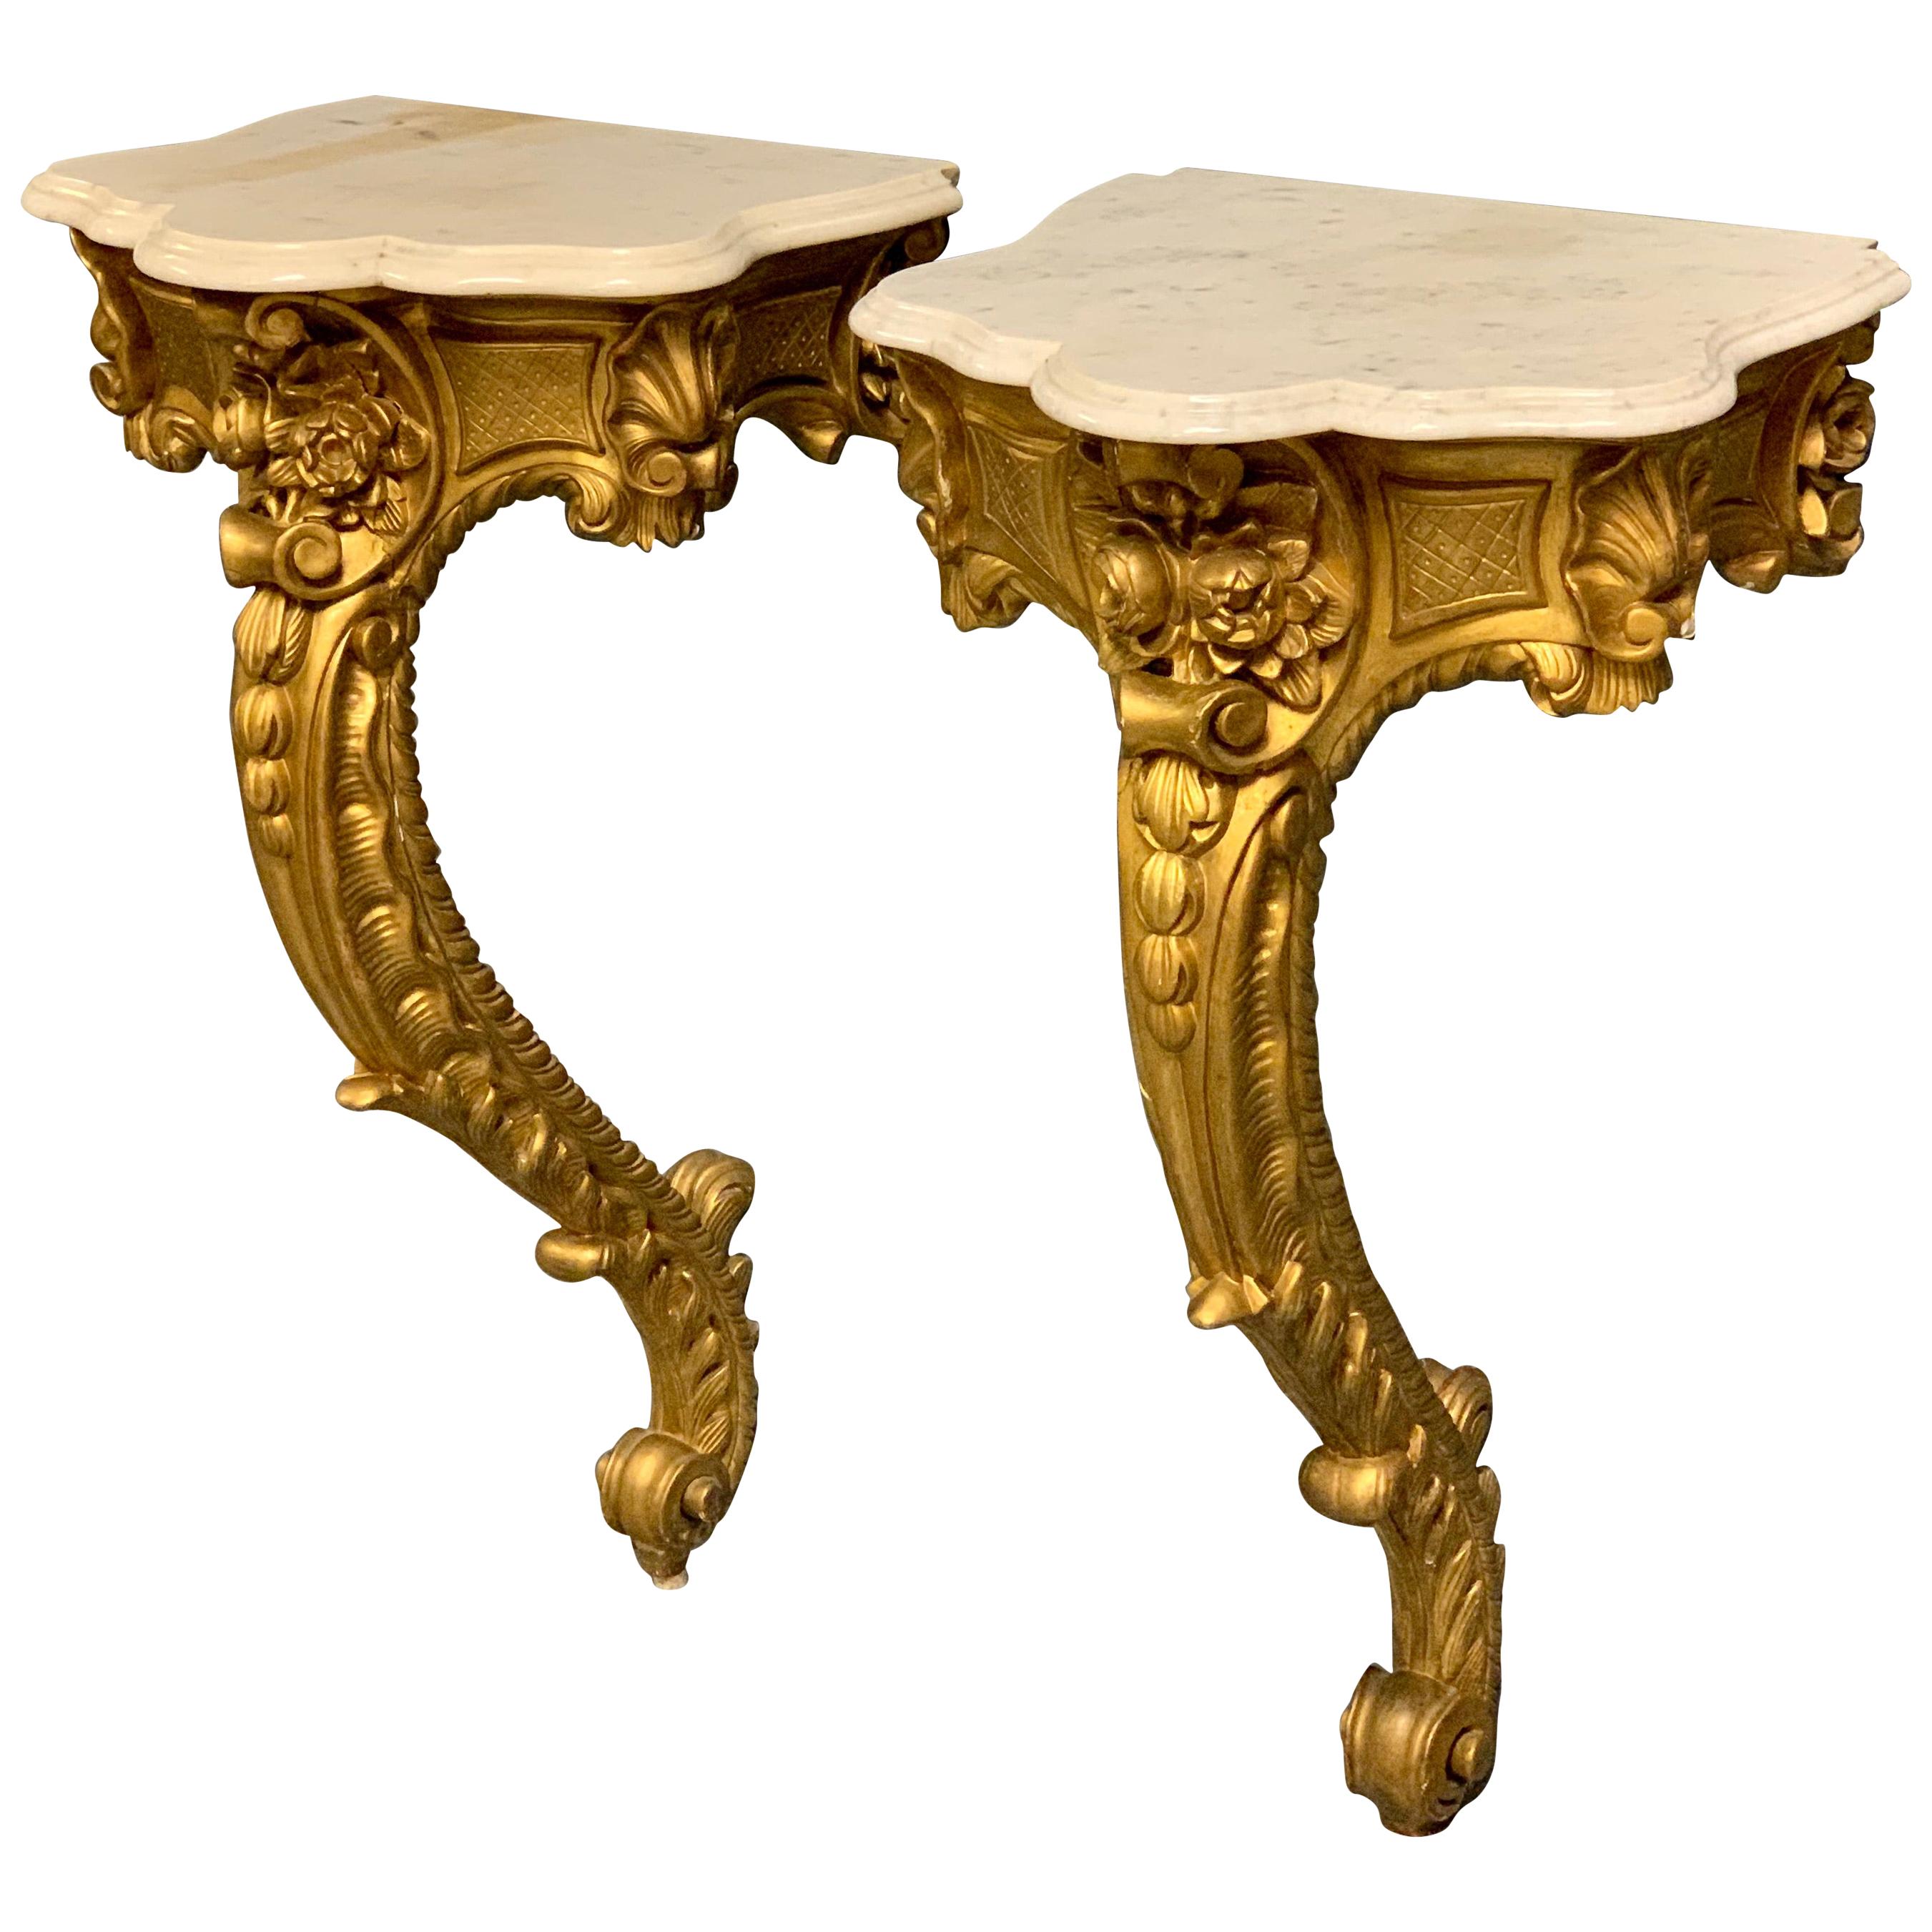 19th Century French Pair of Gilt Wall Mounted Console Tables with Marble Tops For Sale